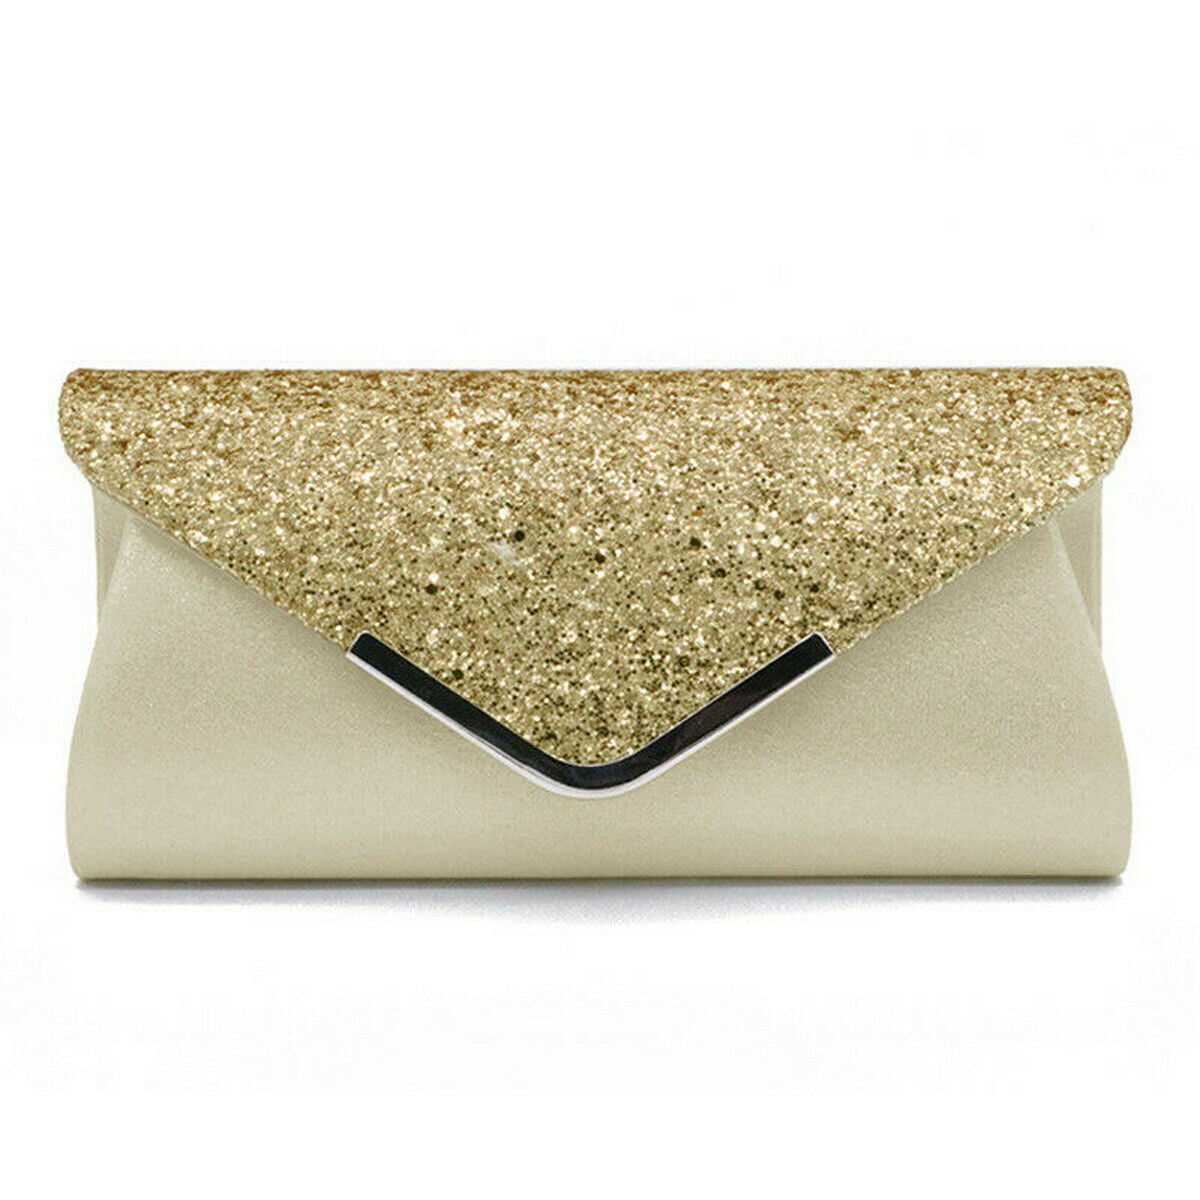 Shinny Faux Leather Wedding Ladies Party Prom Evening Clutch Hand Bag Purse 